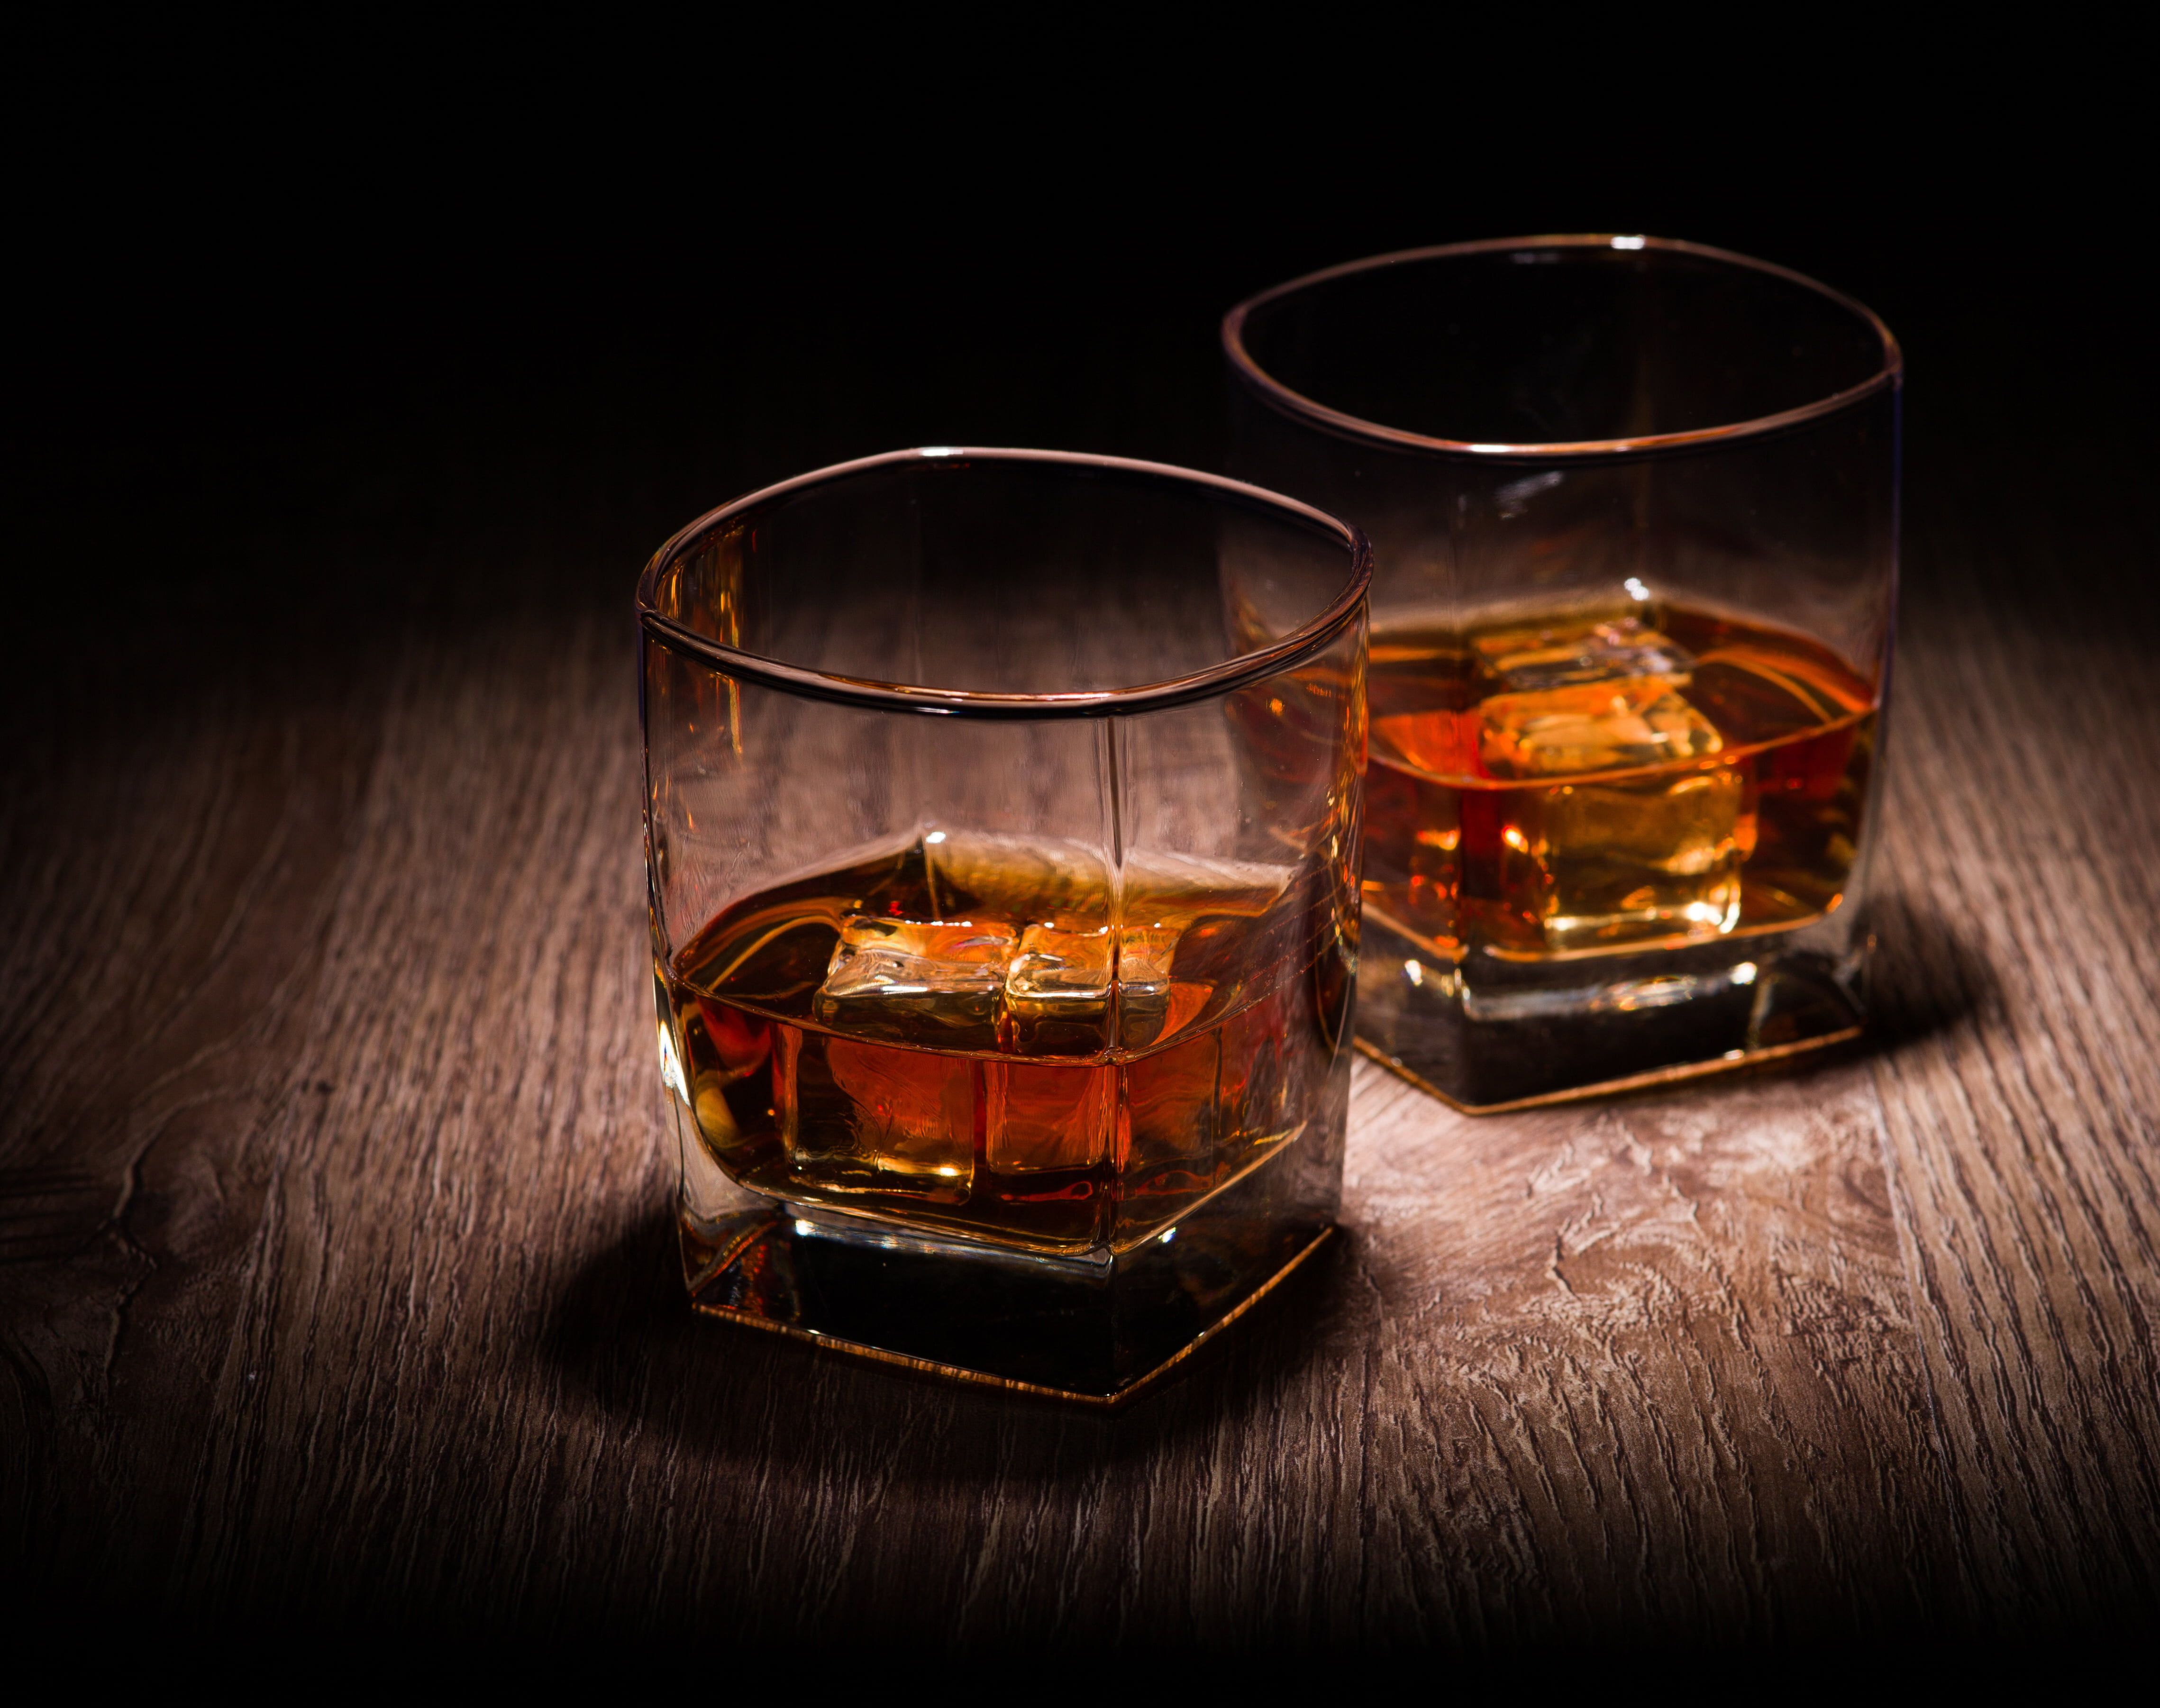 two clear shots glasses #ice #glass #ice #whiskey a glass of whiskey K # wallpaper #hdwallpaper #desktop. Whisky, Small batch bourbon, Whiskey